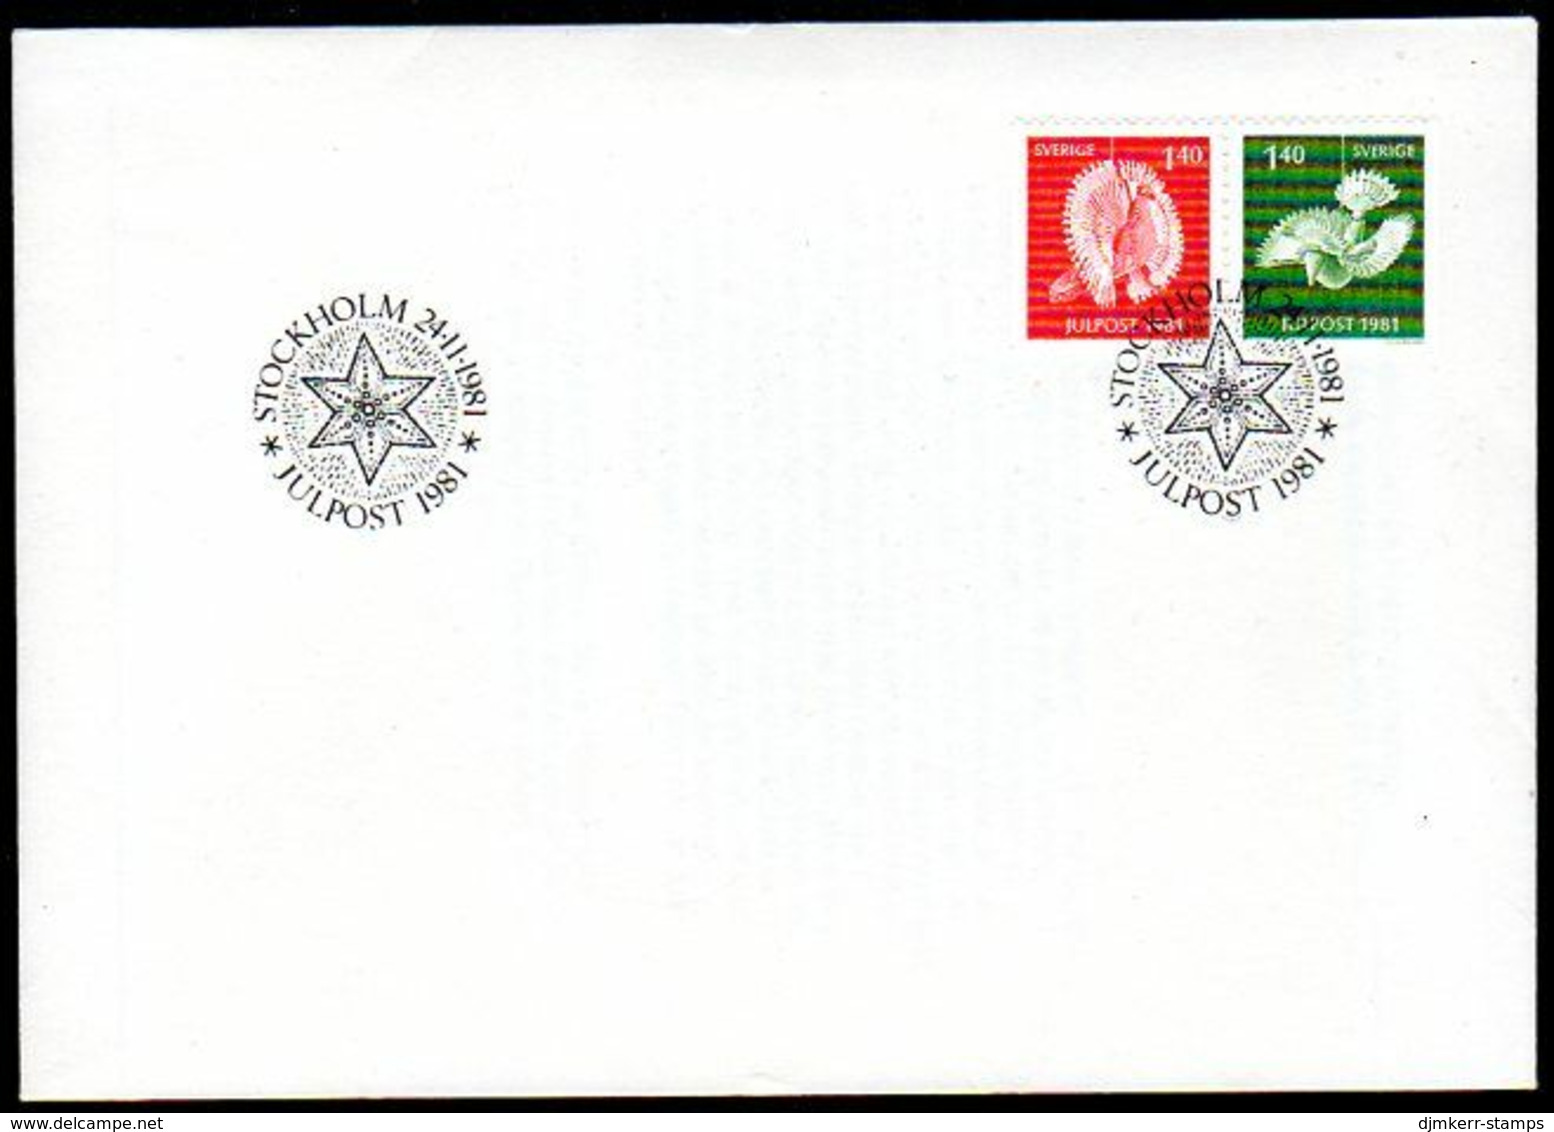 SWEDEN 1981 Christmas FDC. Michel 1173-74 - FDC